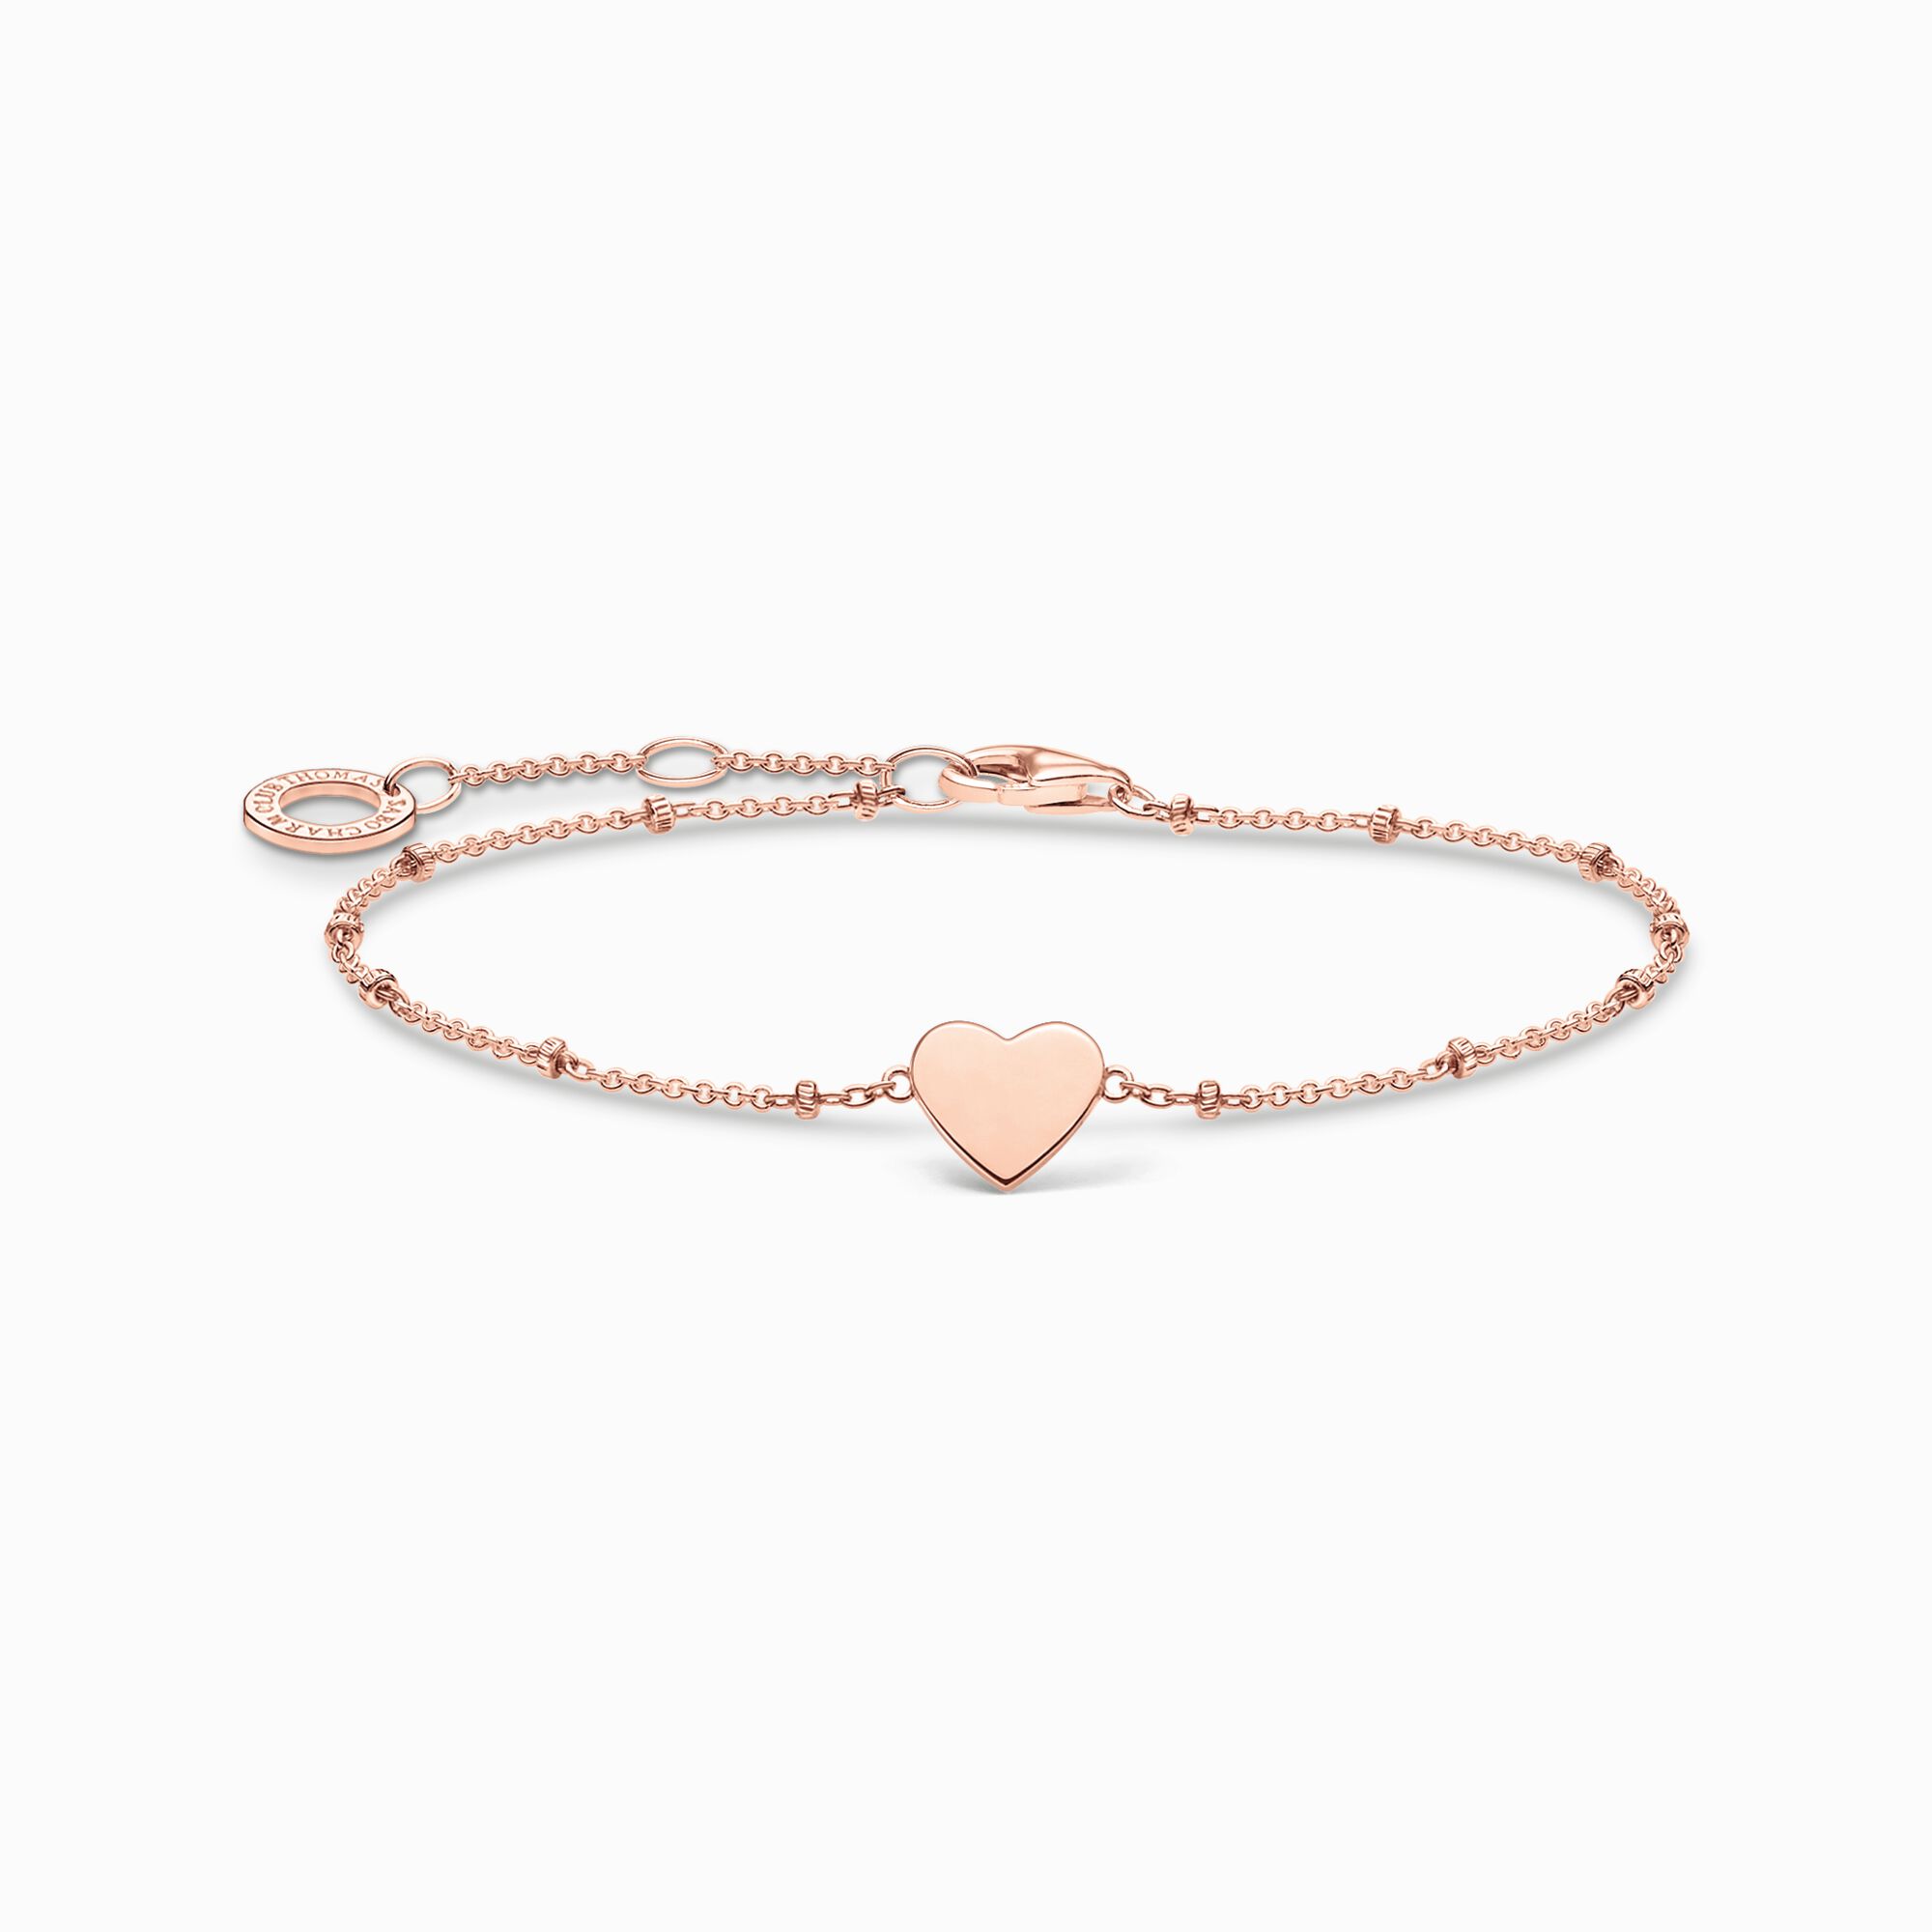 Bracelet heart with dots rose gold from the Charming Collection collection in the THOMAS SABO online store